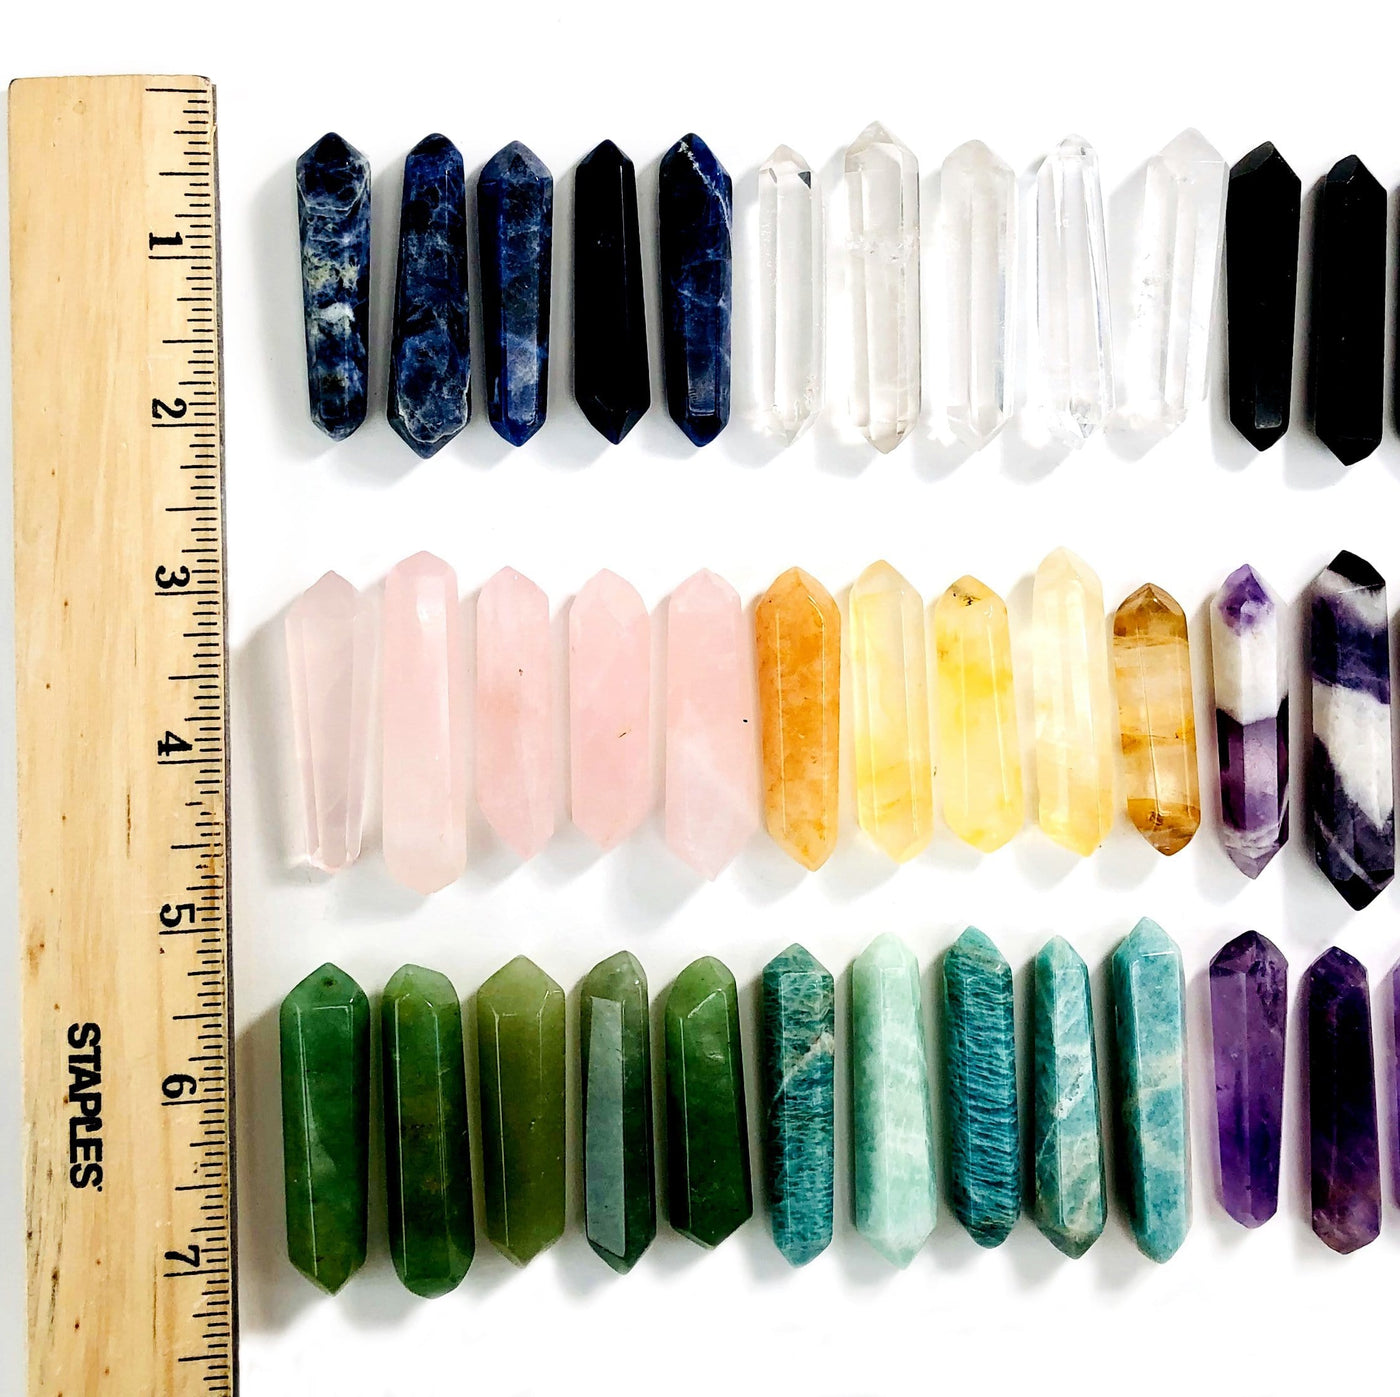 Gemstone Polished Bi-terminated Points next to ruler for size comparison